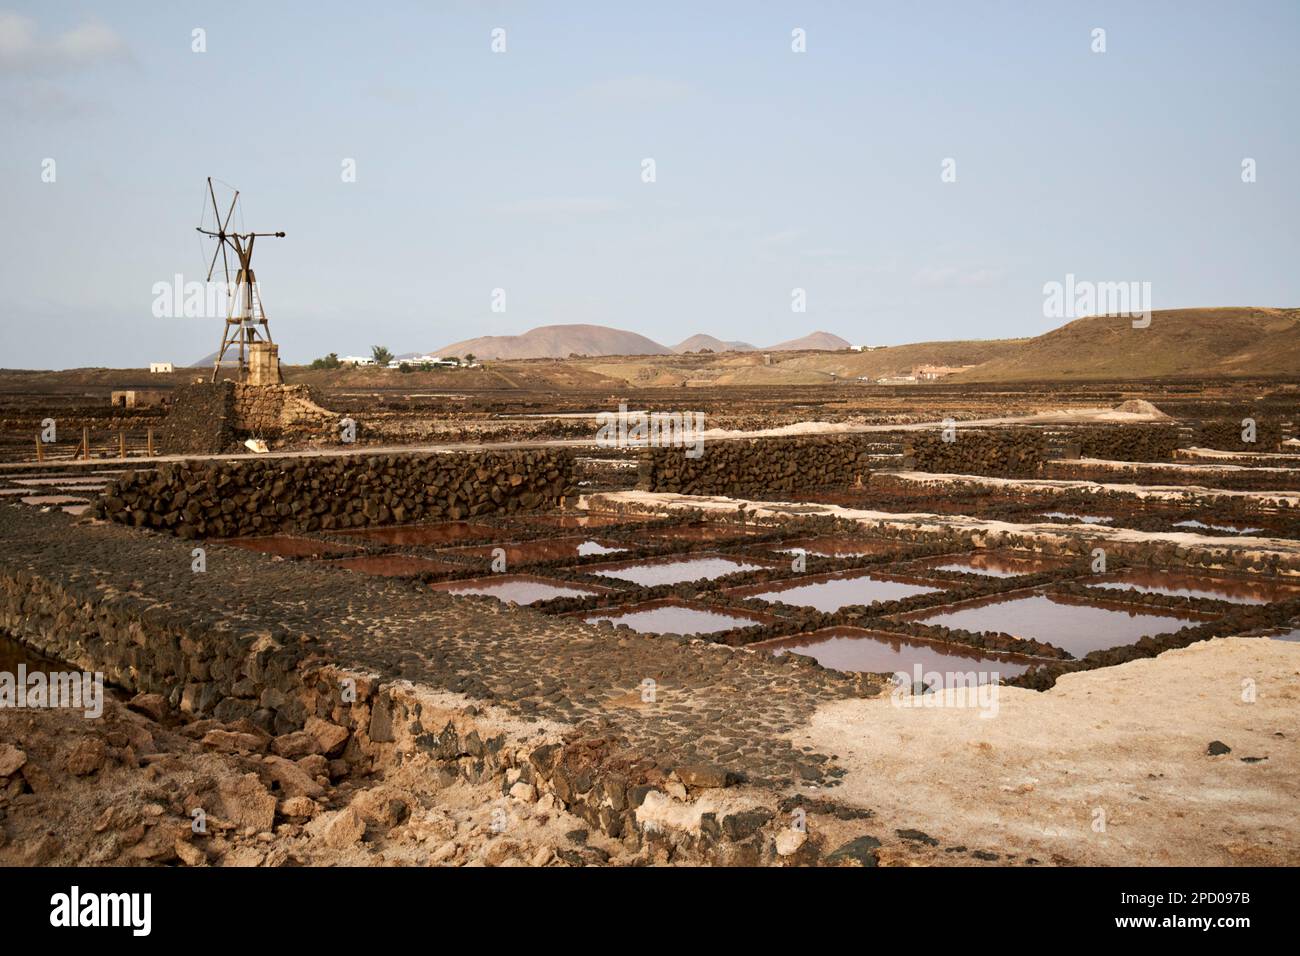 final stage salt water evaporation pools with remains of old wind powered pumping tower salinas de janubio salt flats Lanzarote, Canary Islands, Spain Stock Photo